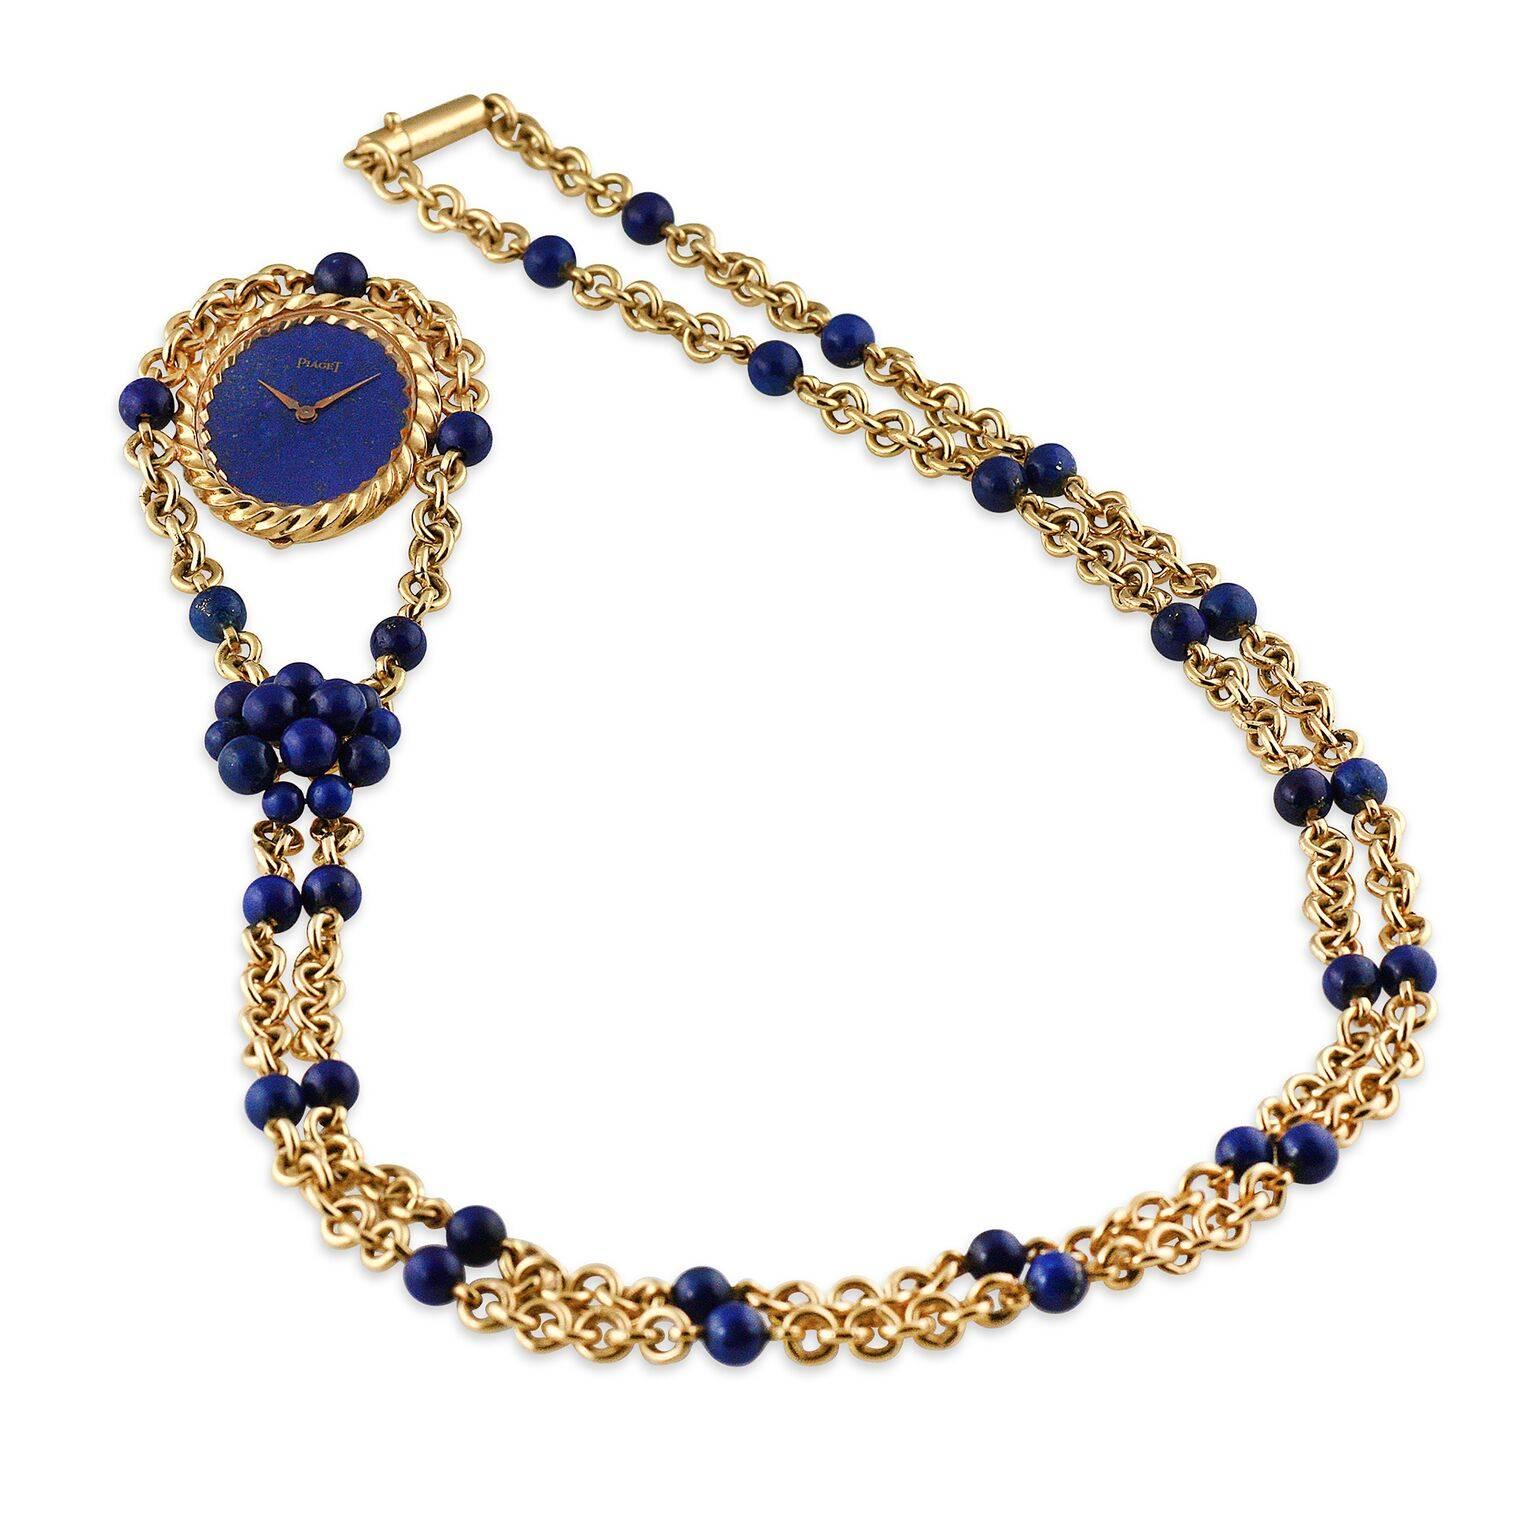 A highly elegant and unique Piaget necklace watch in 18k yellow gold with blue Lapis Lazuli beads and fitted dial. Manufactured in the early 1970's, this is an incredible piece of midcentury modern jewelry.